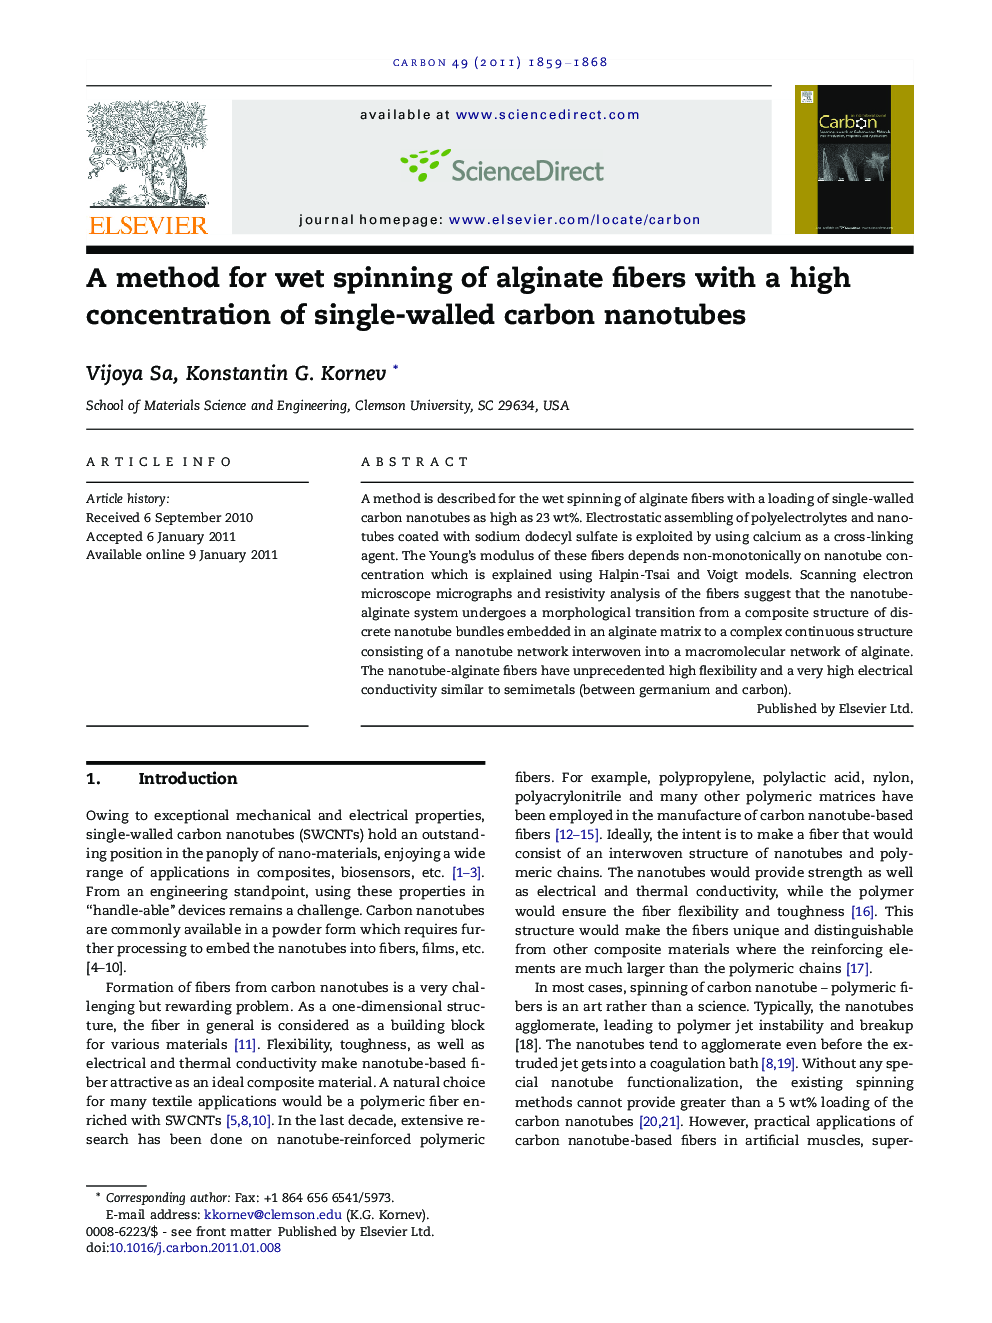 A method for wet spinning of alginate fibers with a high concentration of single-walled carbon nanotubes